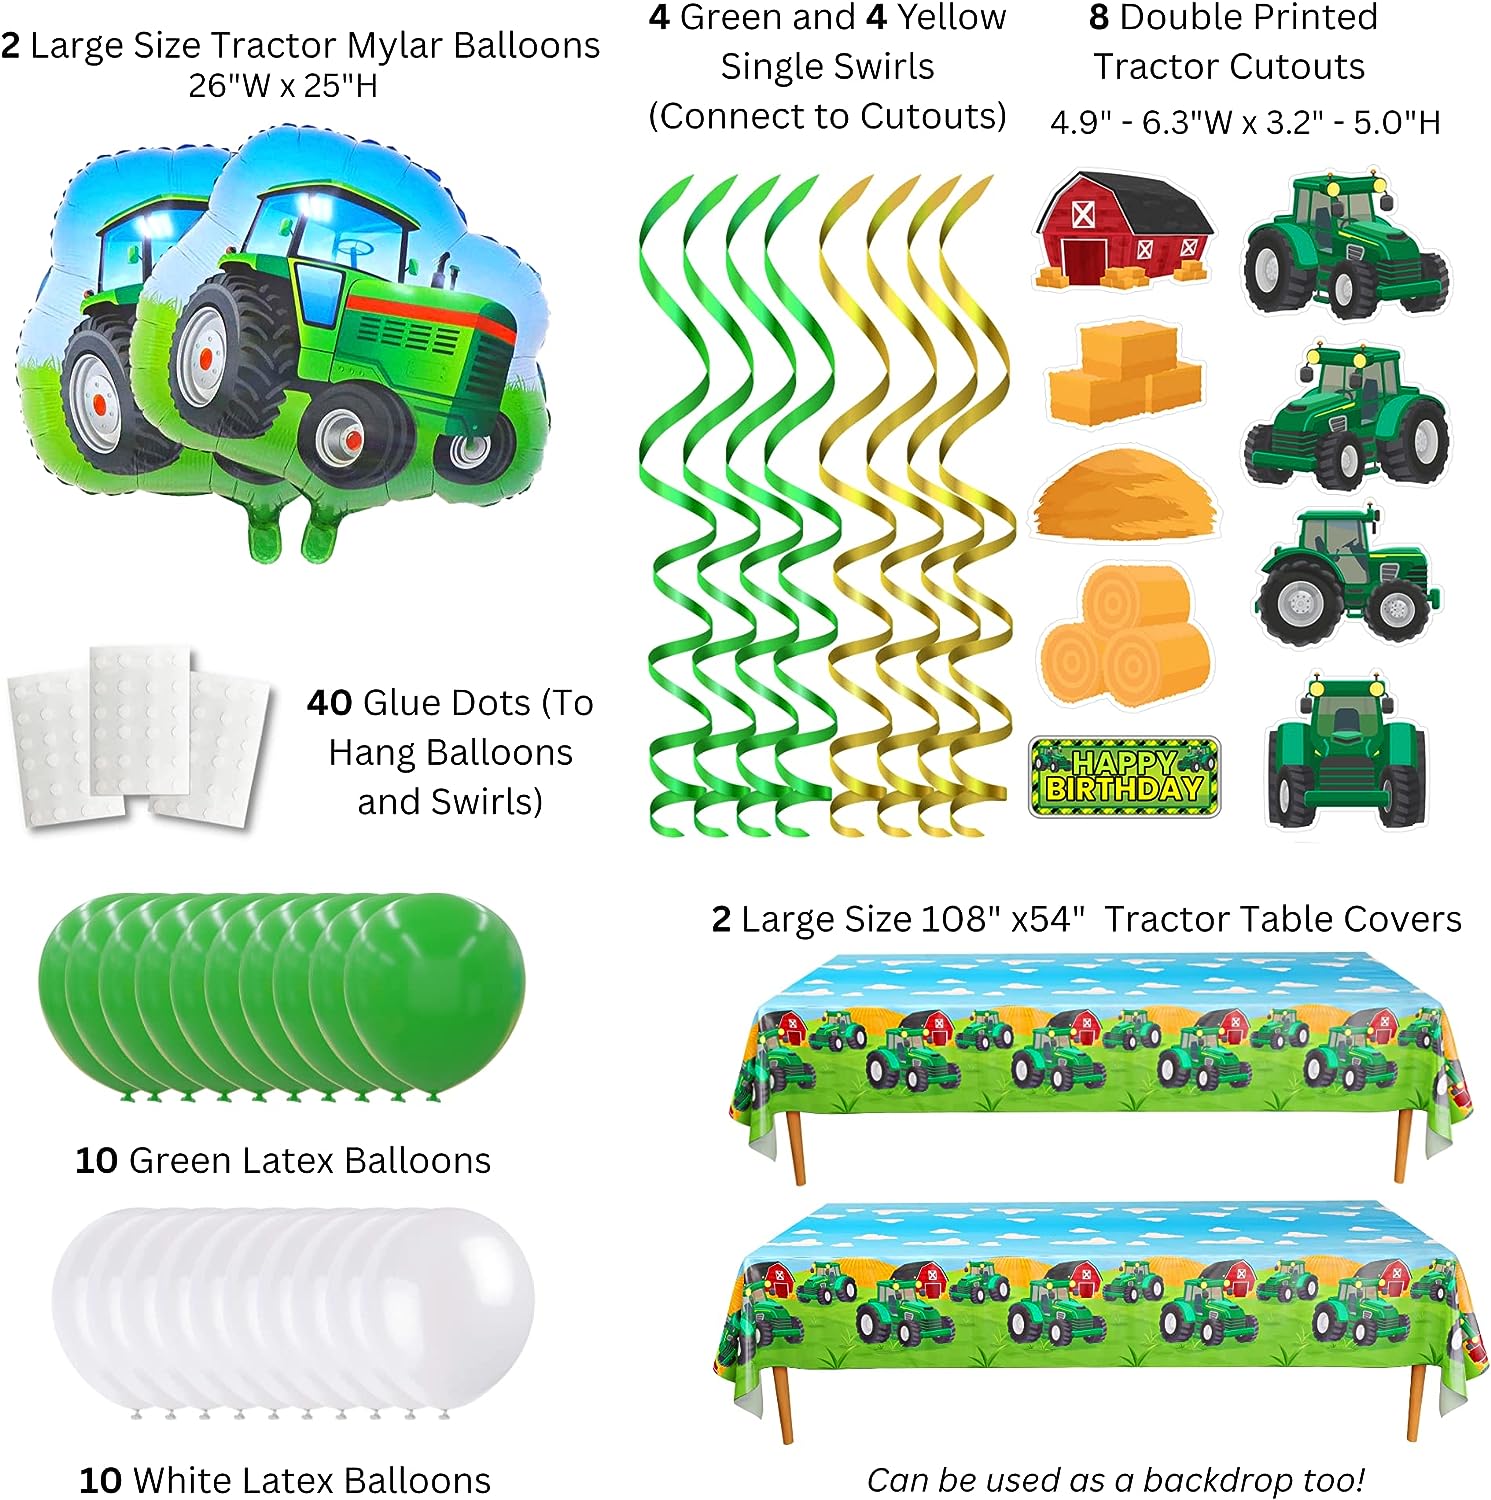 Tractor Deluxe Pack - Contains: (10) Green Balloons - (10) White Balloons -  - (2) Large Tractor Shape Mylar Balloons - (8) Double Printed Cutouts (Tractor Shapes, Barn House Shape, Haystacks Shapes, and Rectagular Happy Birthday)- (4) Green Single Swirls - (4) Yellow Single Swirls - (40) Glue Dots - (2) 108" x 54" Tractor Table Covers